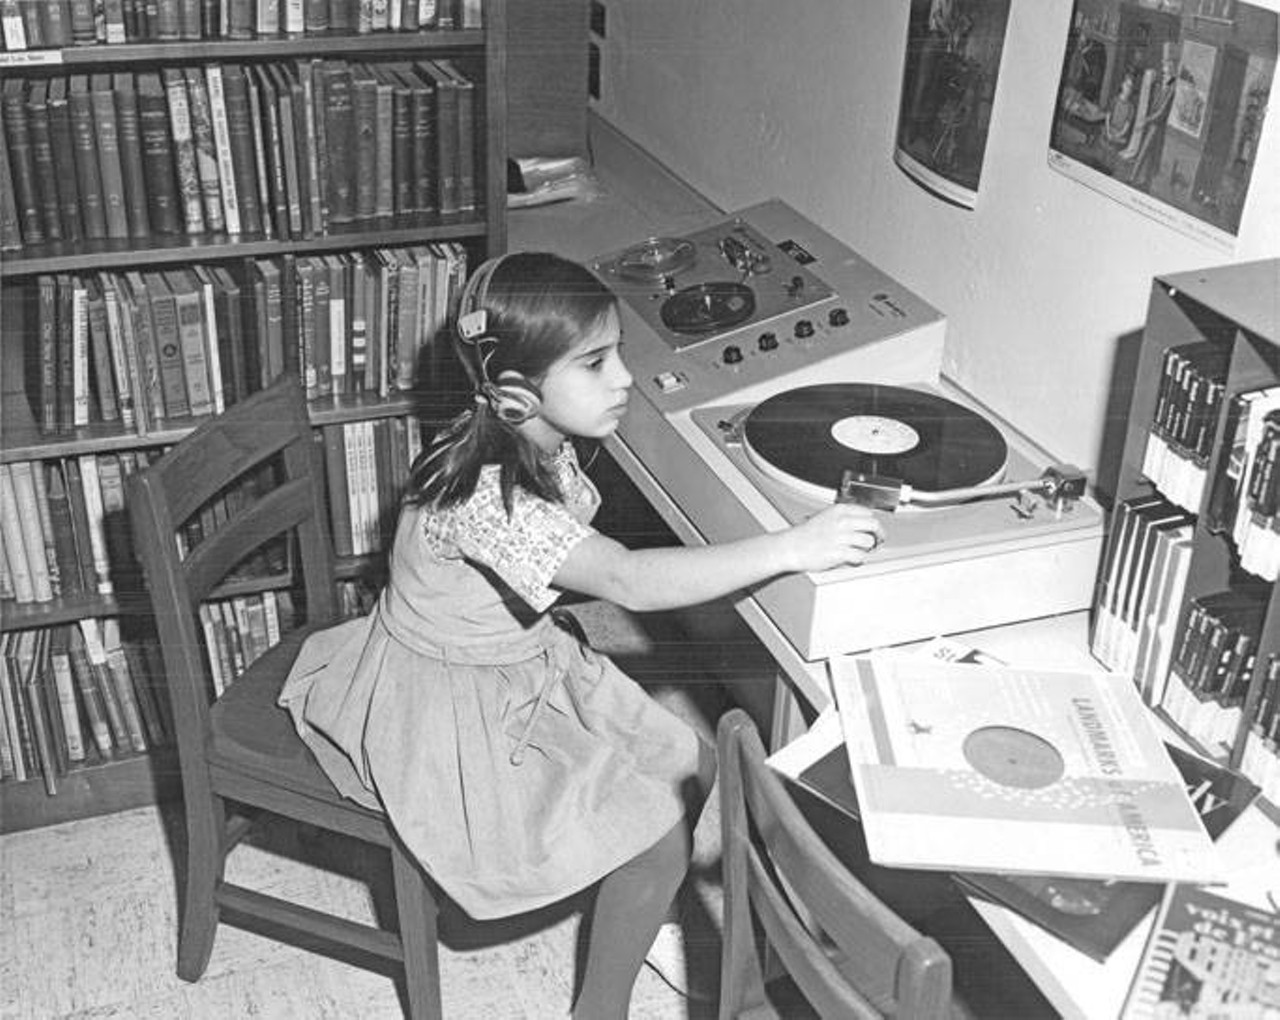 Barbara Gross, a fourth-grader at Malvern Elementary School, listens to a recording on headphones in the school library. 1966